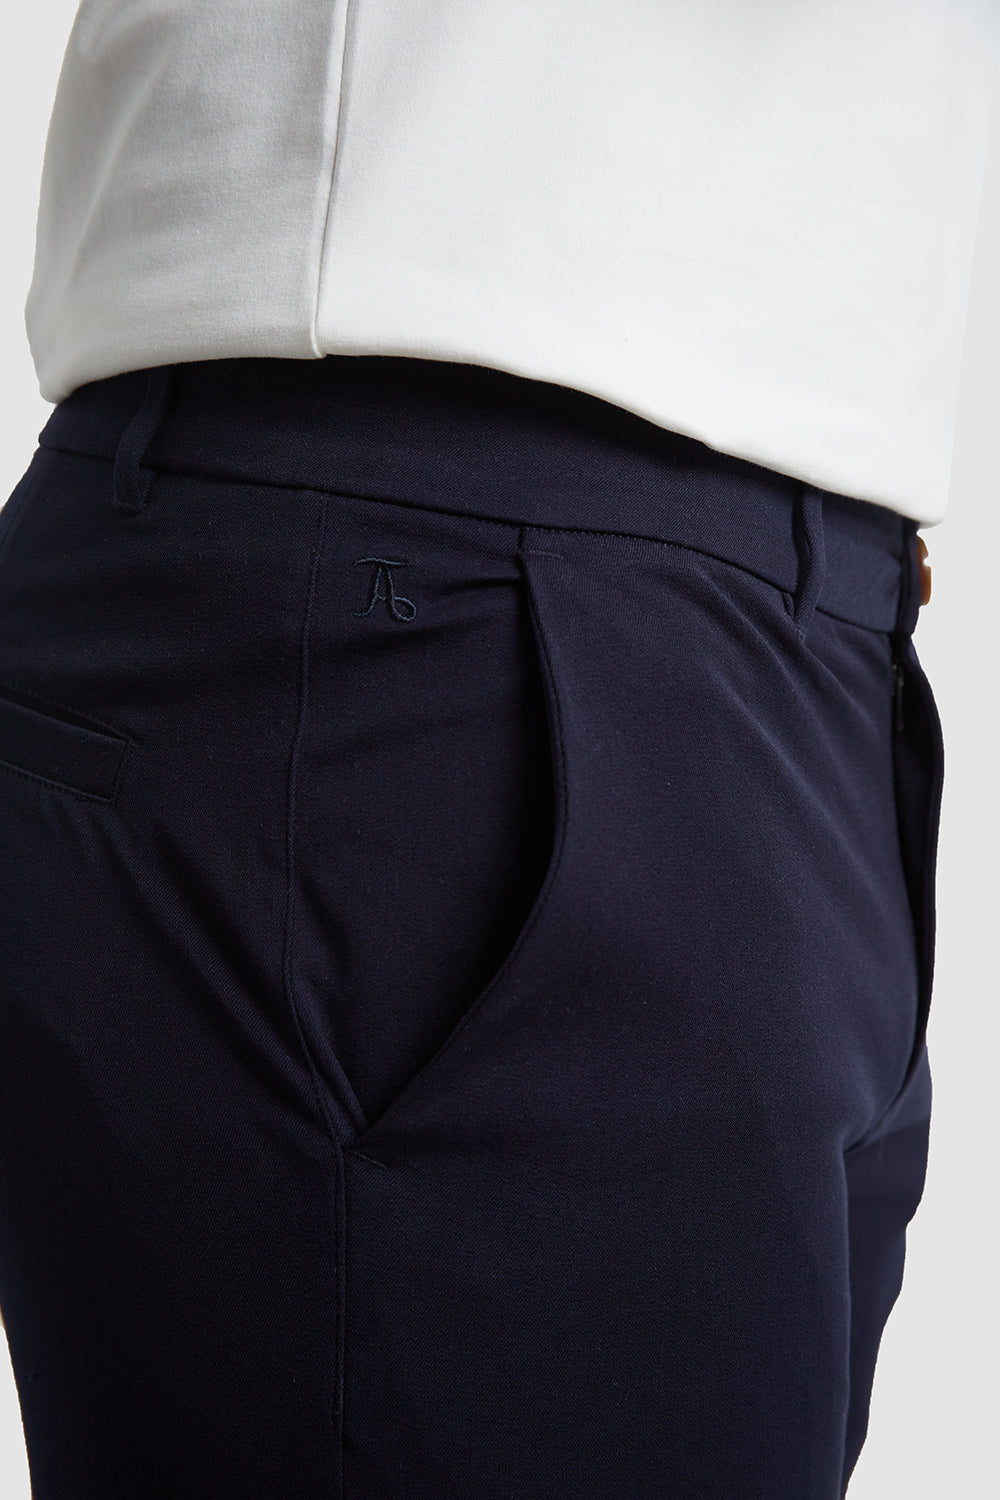 in - Chino Athletic USA TAILORED Navy - ATHLETE Fit Shorts